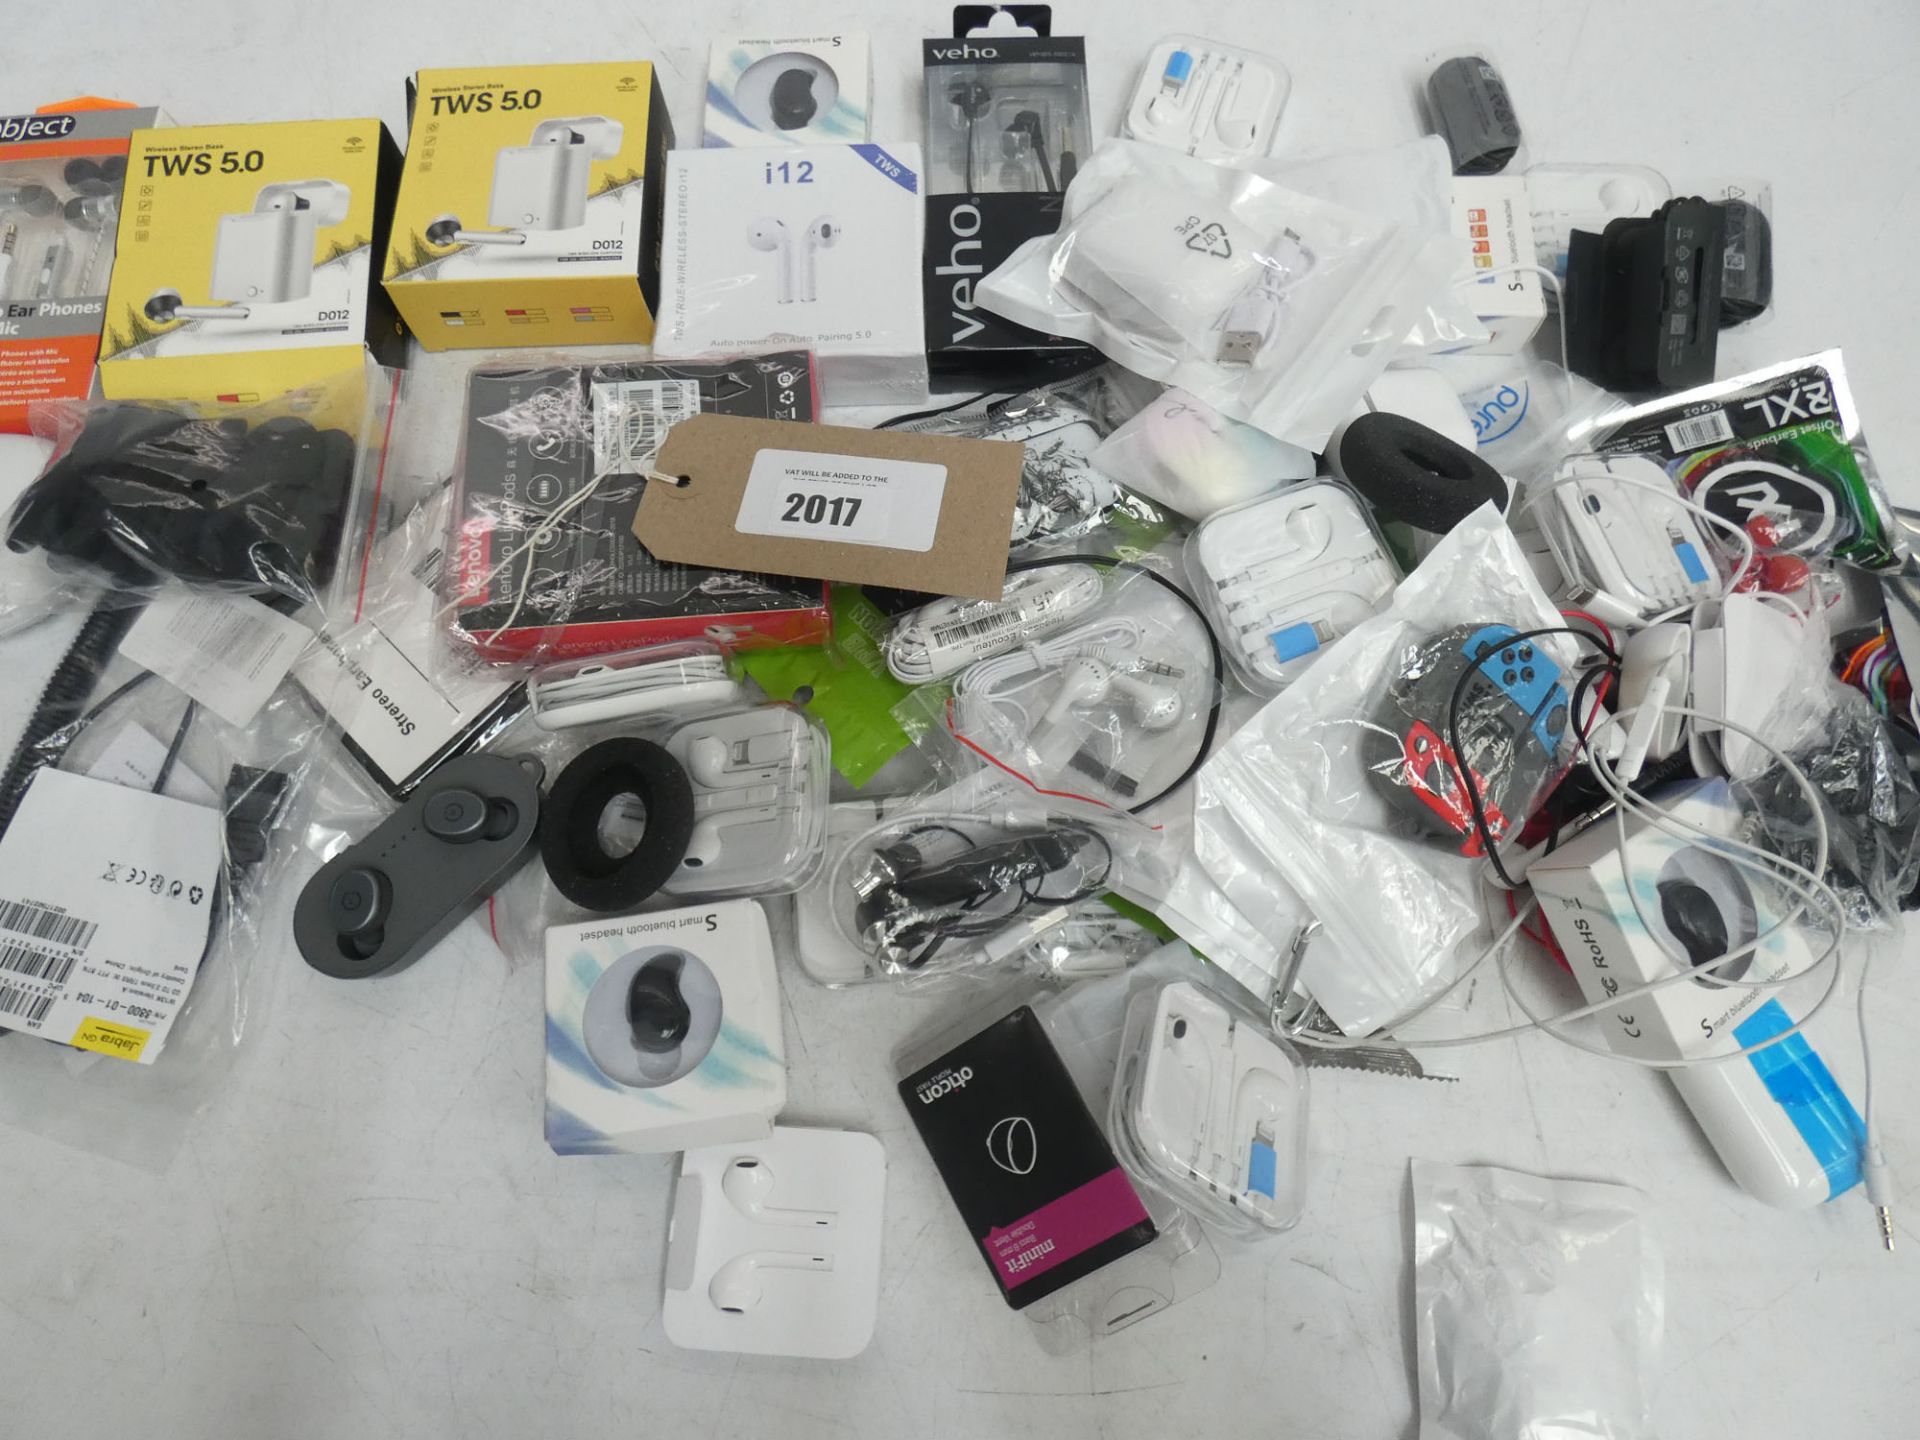 Bag containing various wired and wireless earphones